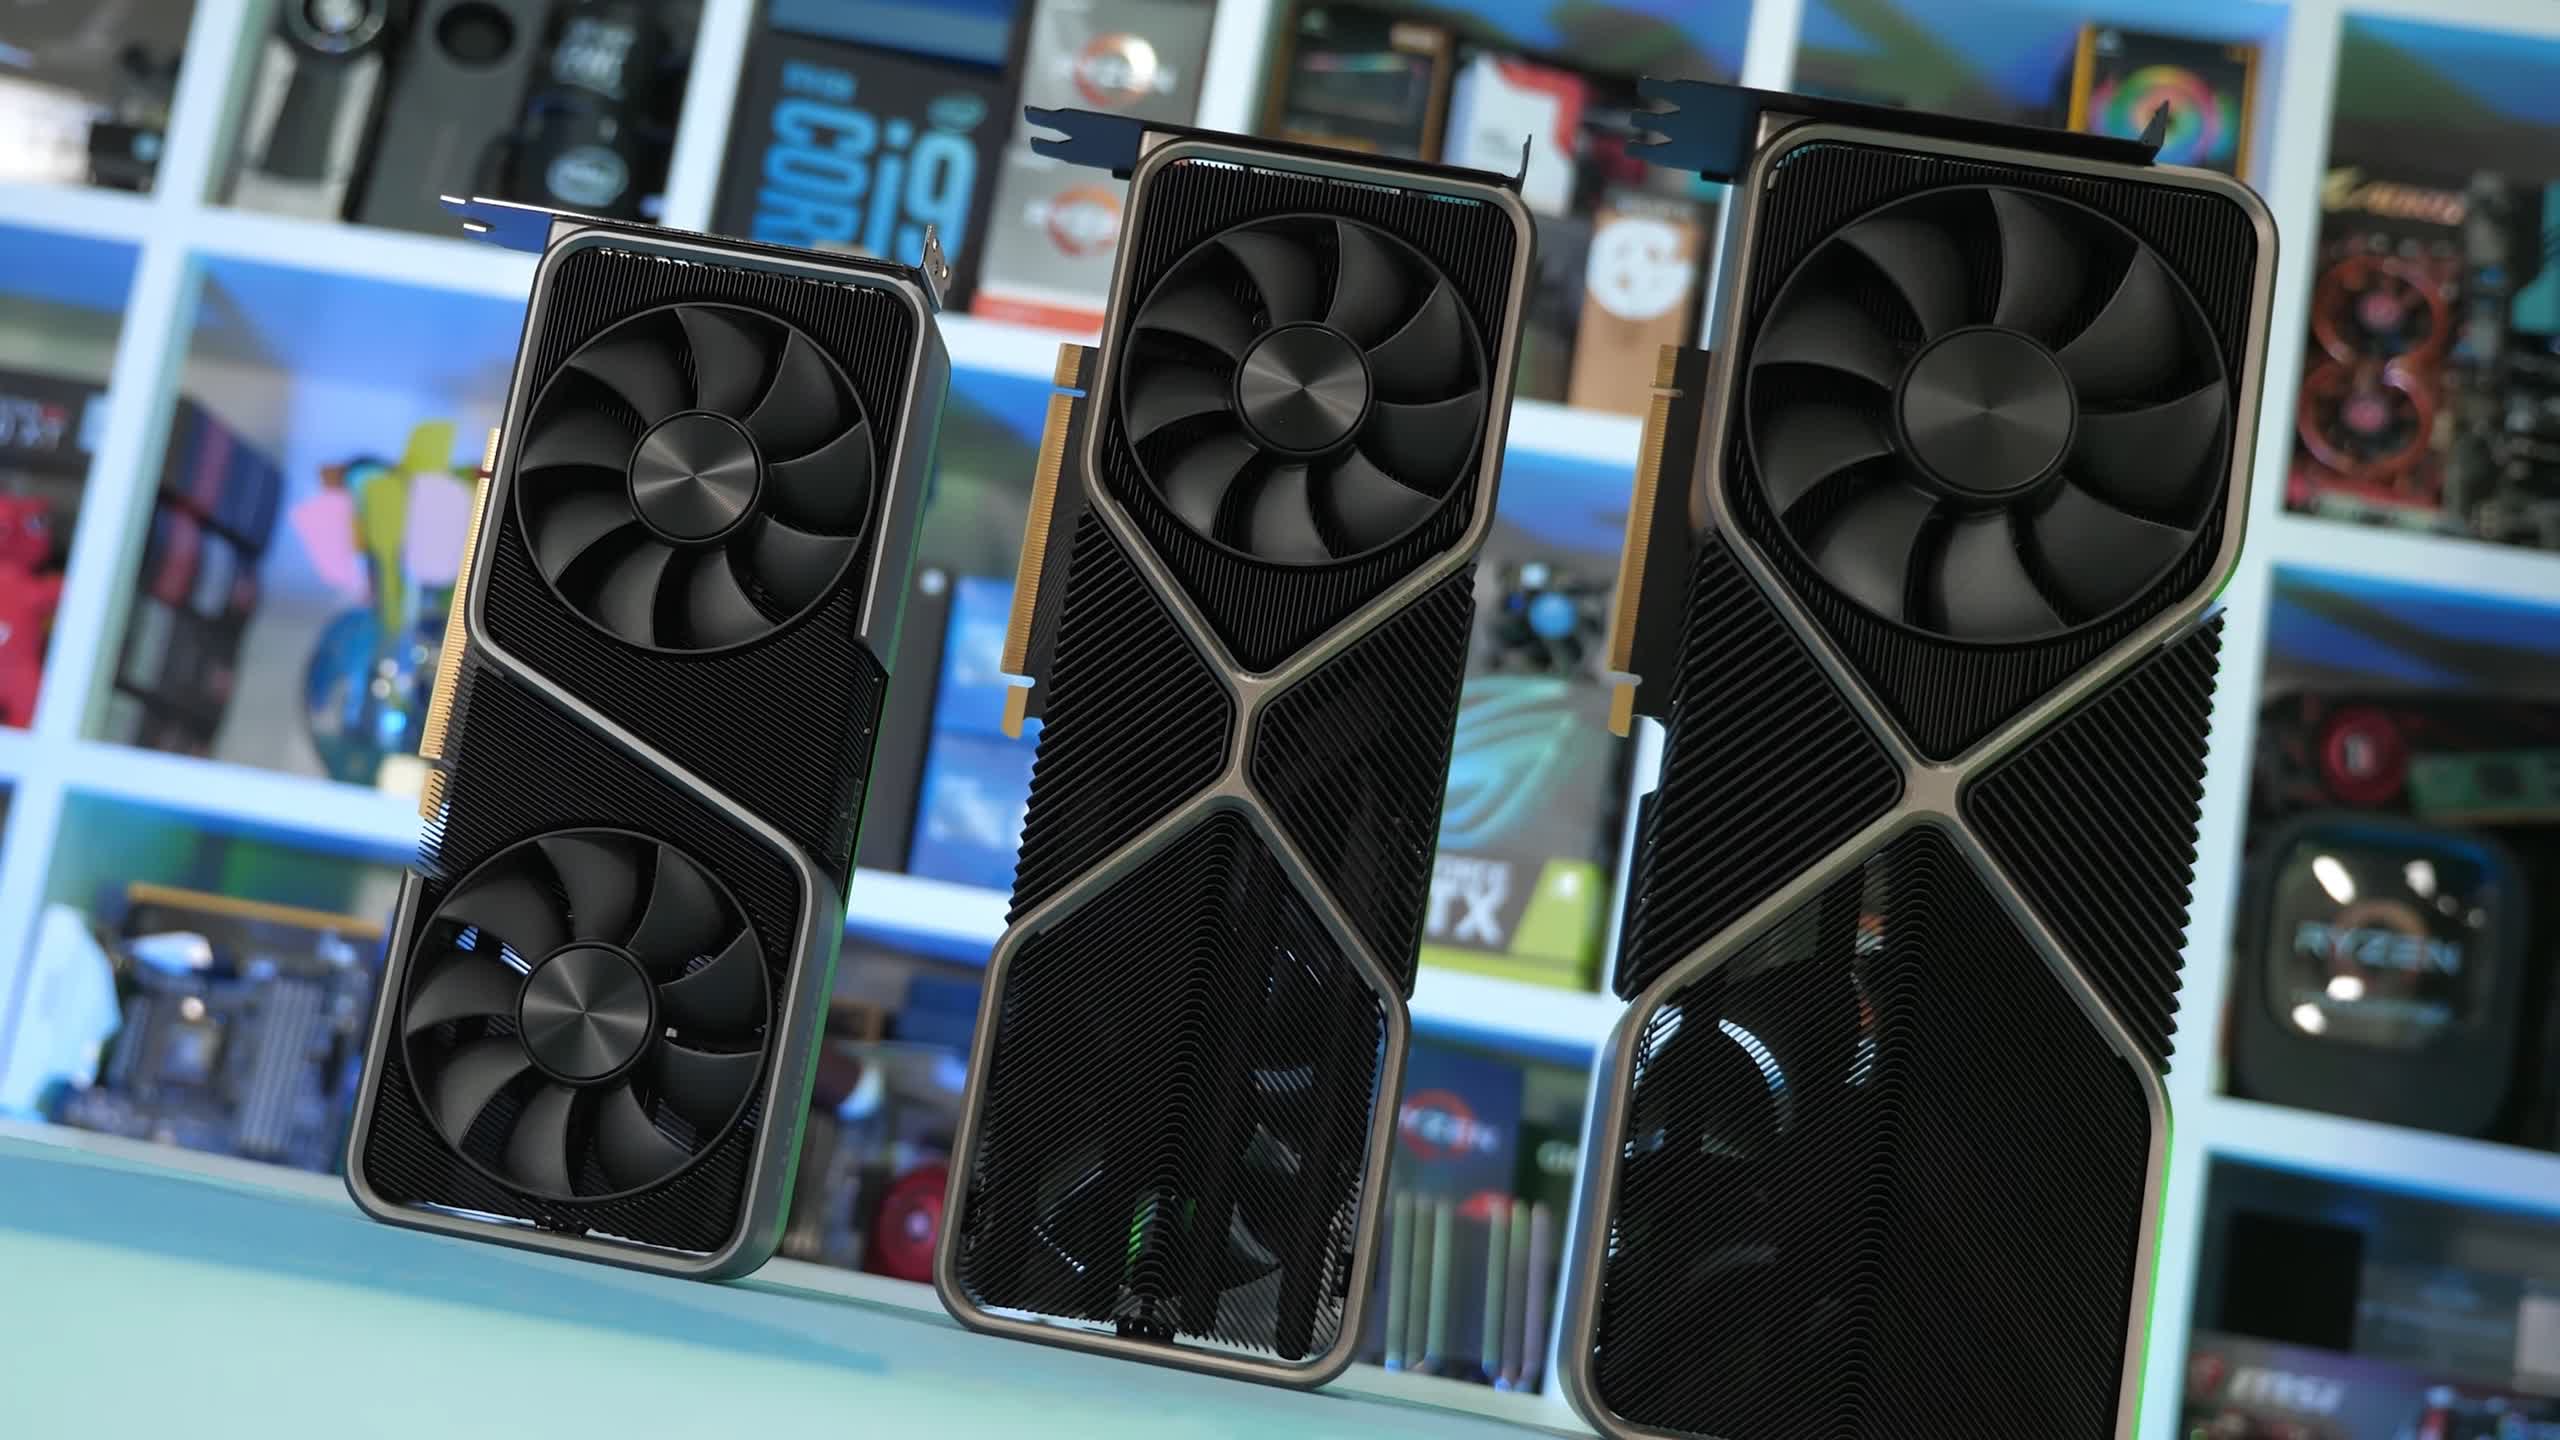 Latest Steam survey: RTX 3070 is the month's top performer, AMD edges closer to 30% CPU share